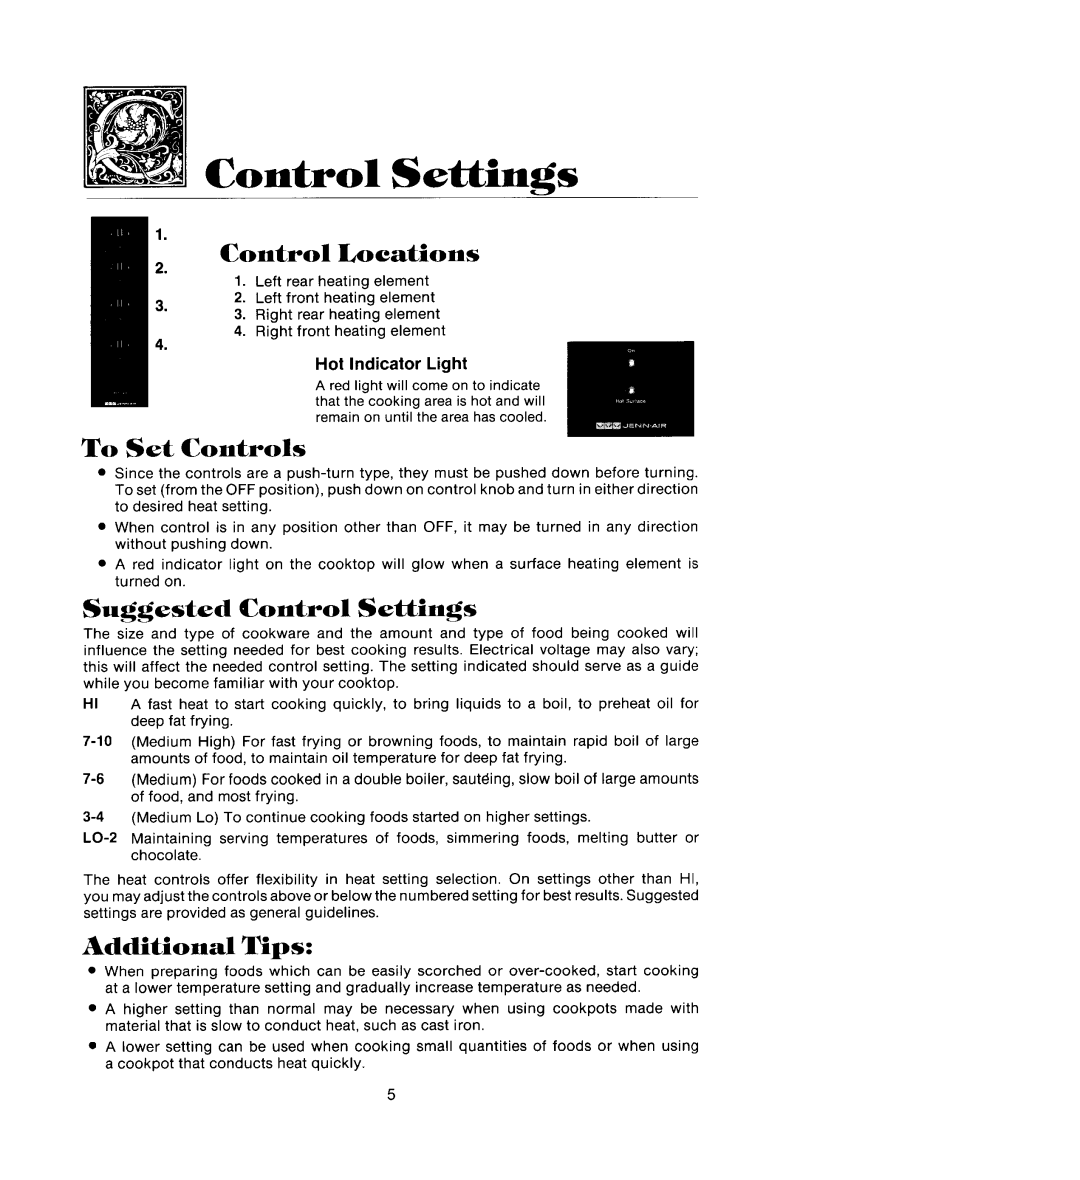 Jenn-Air CCR466B manual Control Locations, To Set Controls, Suggested Control Settings, Additional Tips 